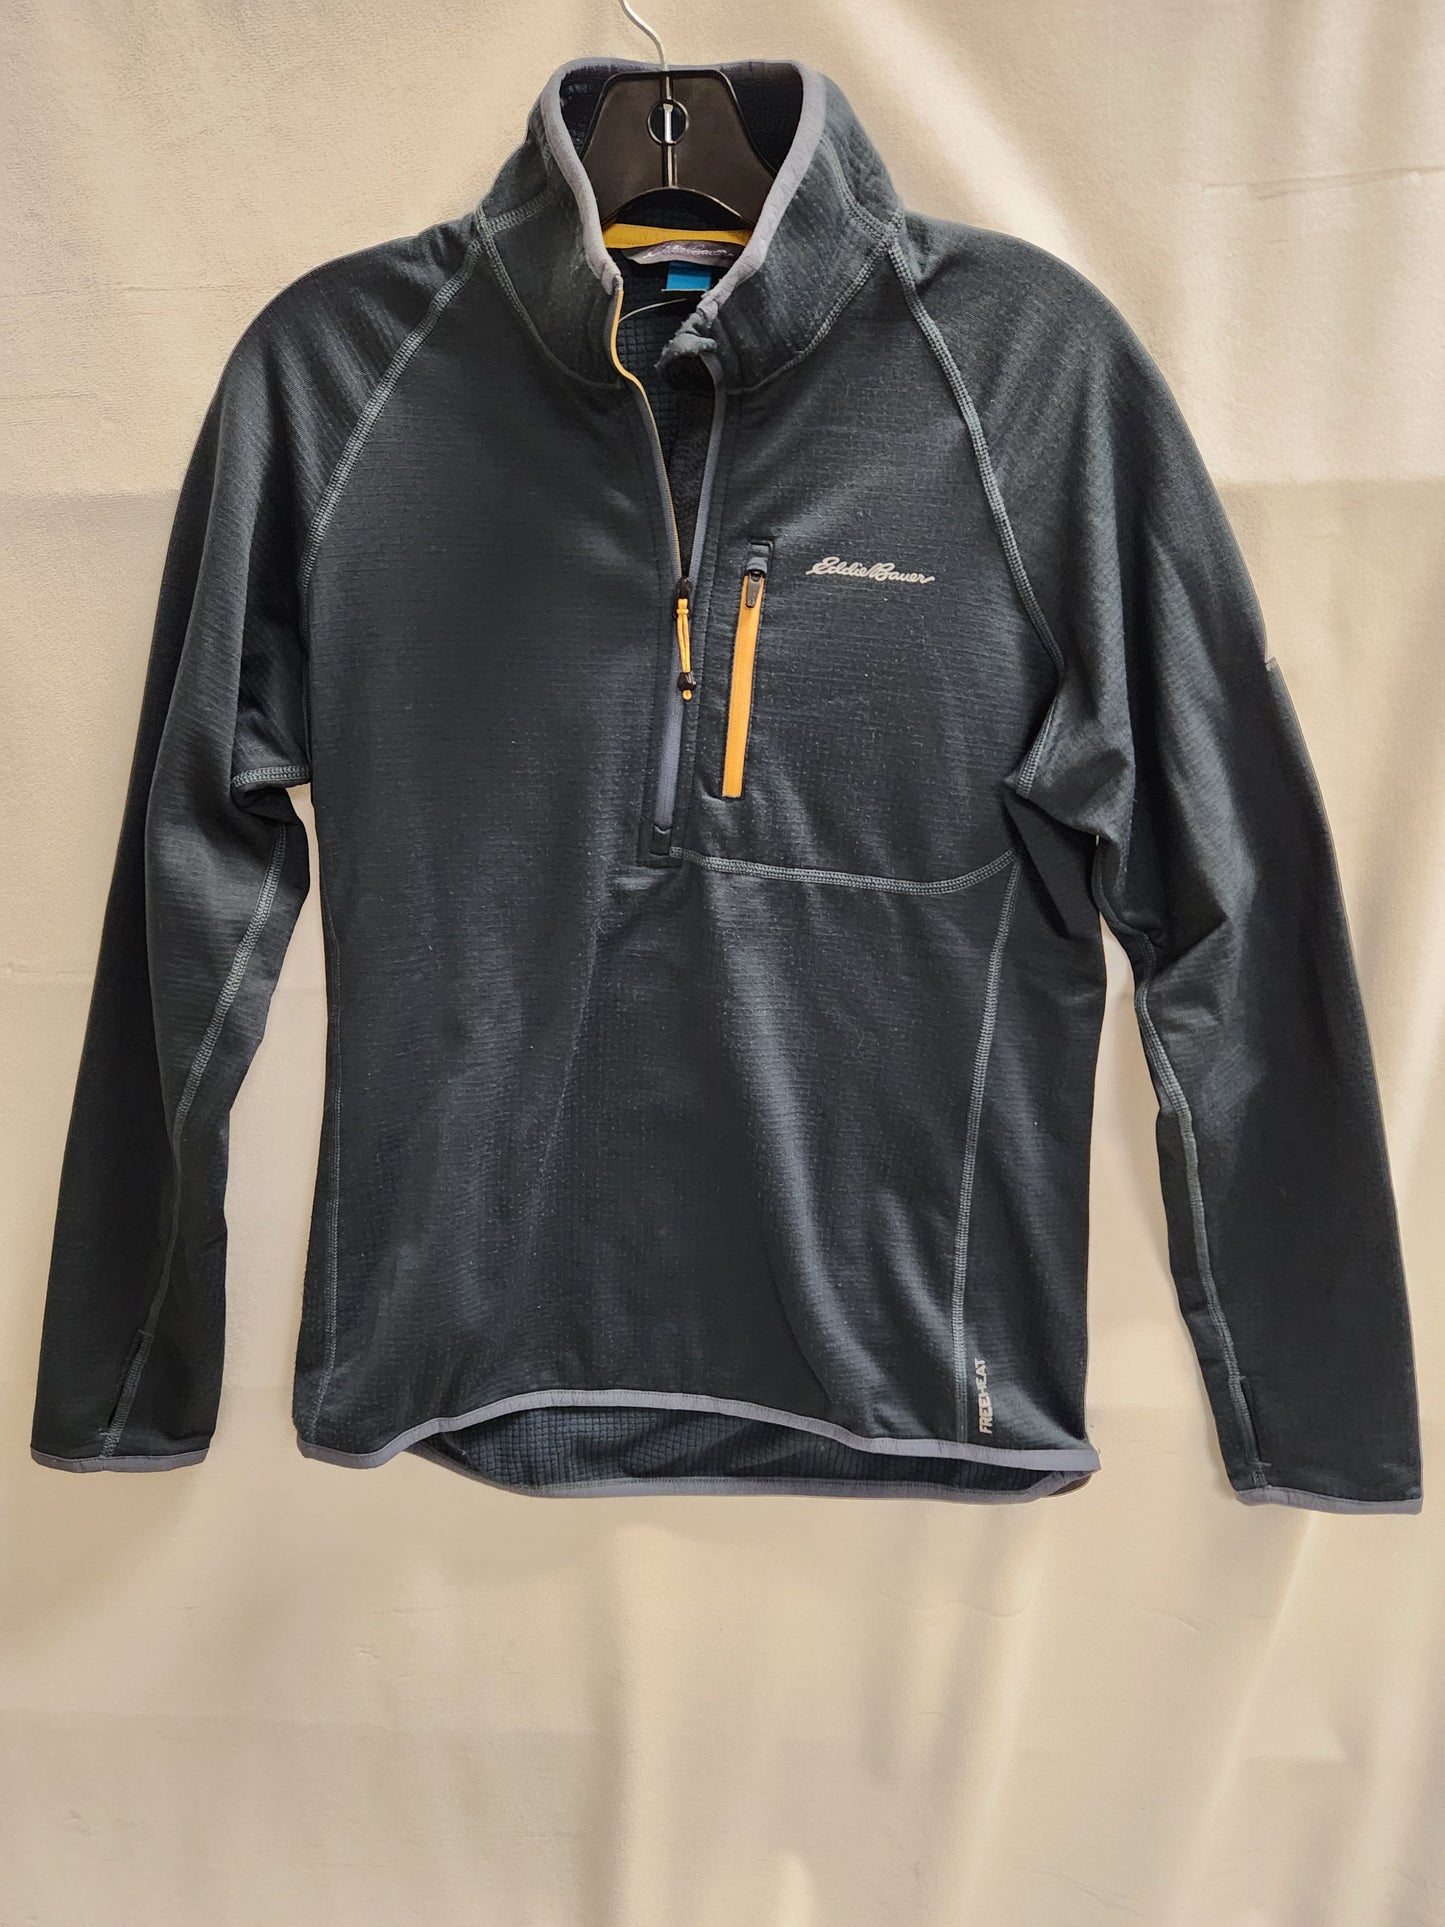 Athletic Top Long Sleeve Collar By Eddie Bauer  Size: M